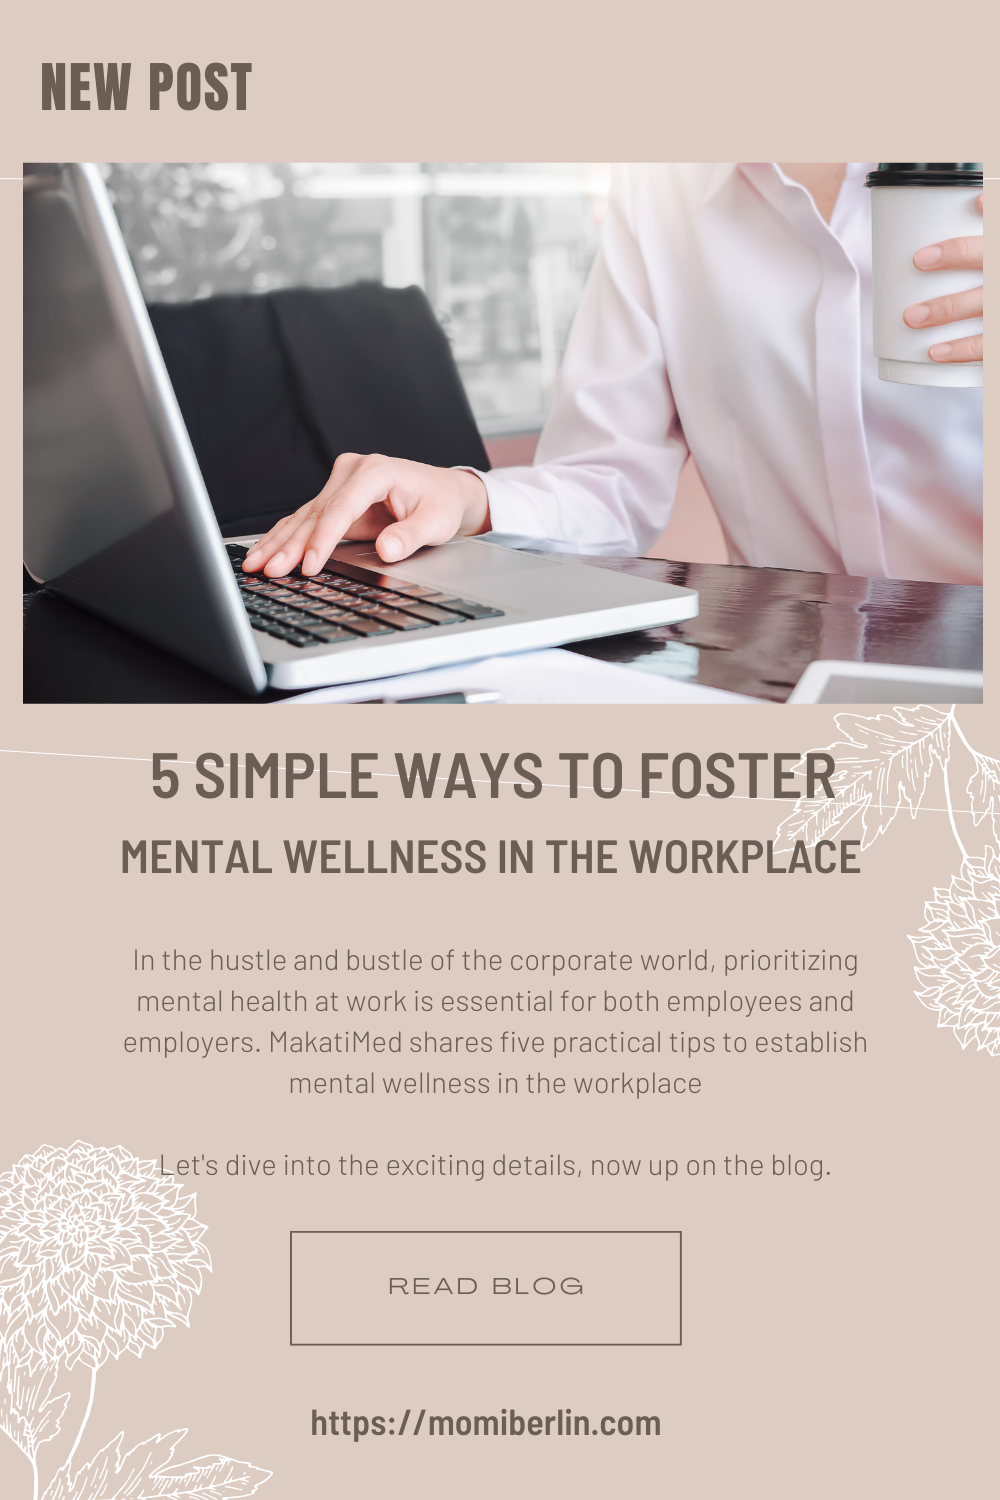 How to Foster Mental Wellness in the Workplace